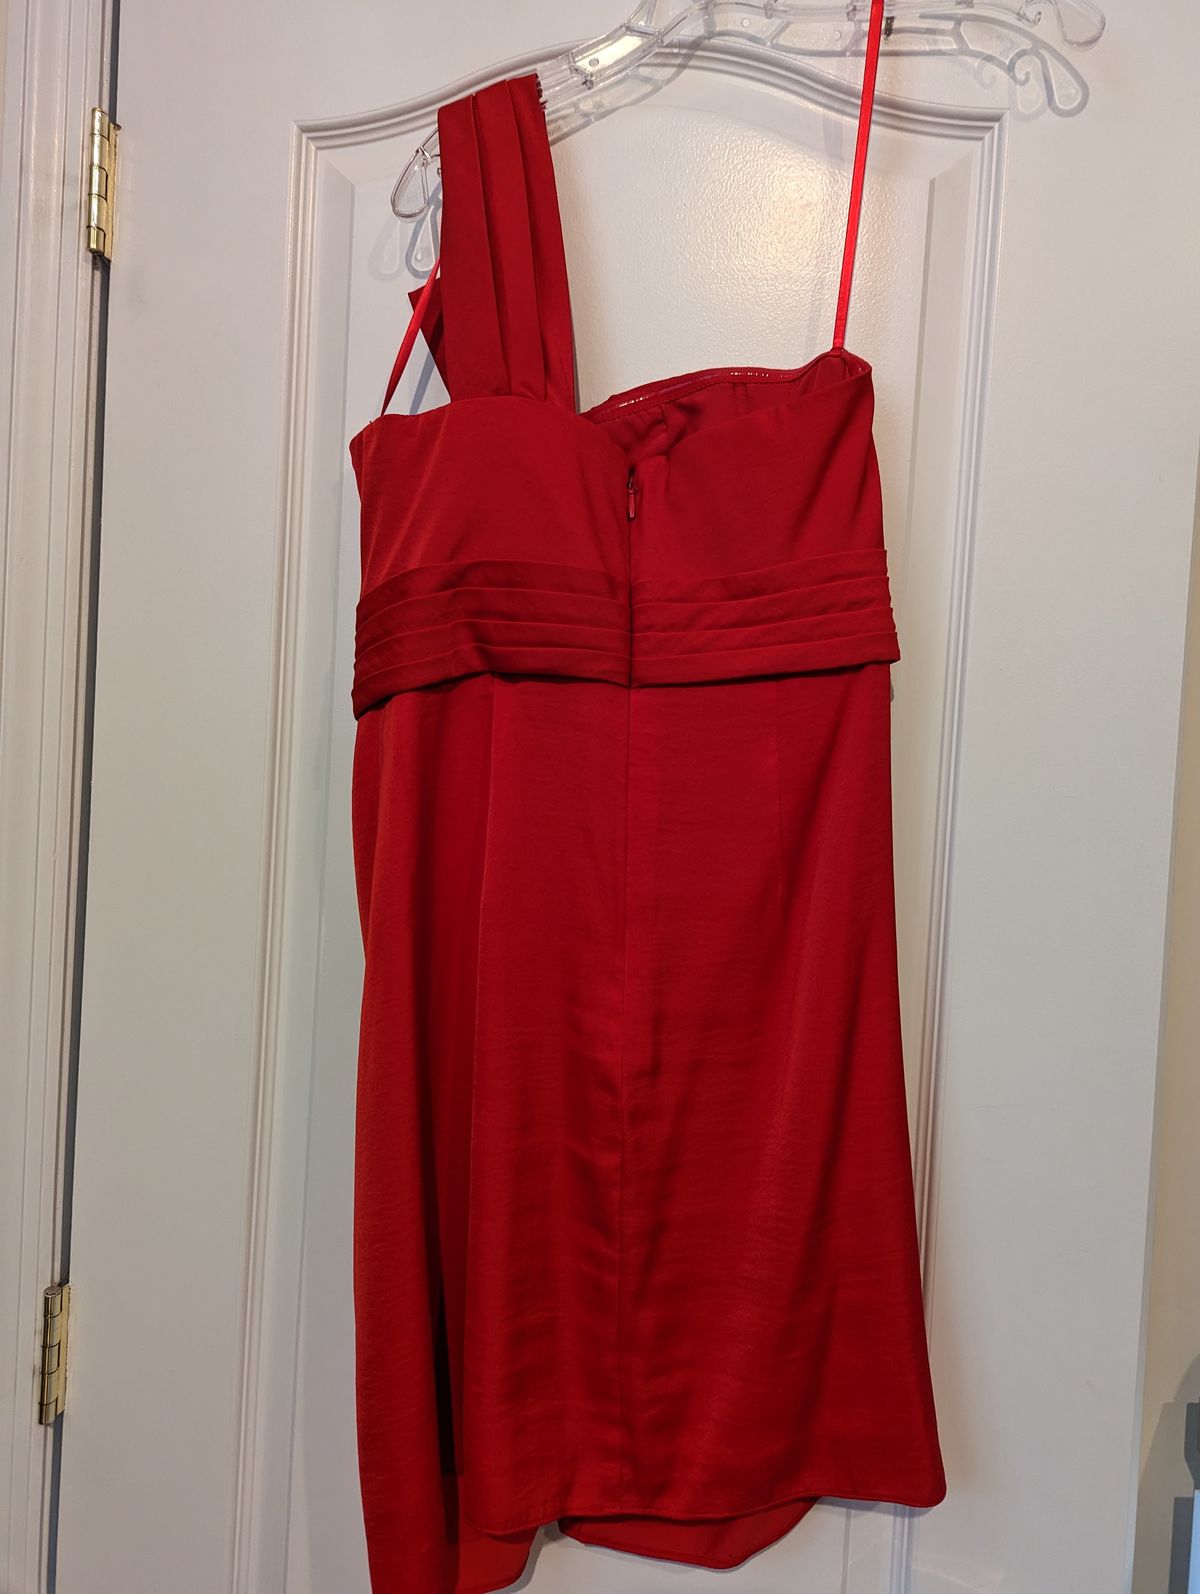 BCBG Max Azria Red Palais dress in size 6 Size 6 Red Cocktail Dress on Queenly